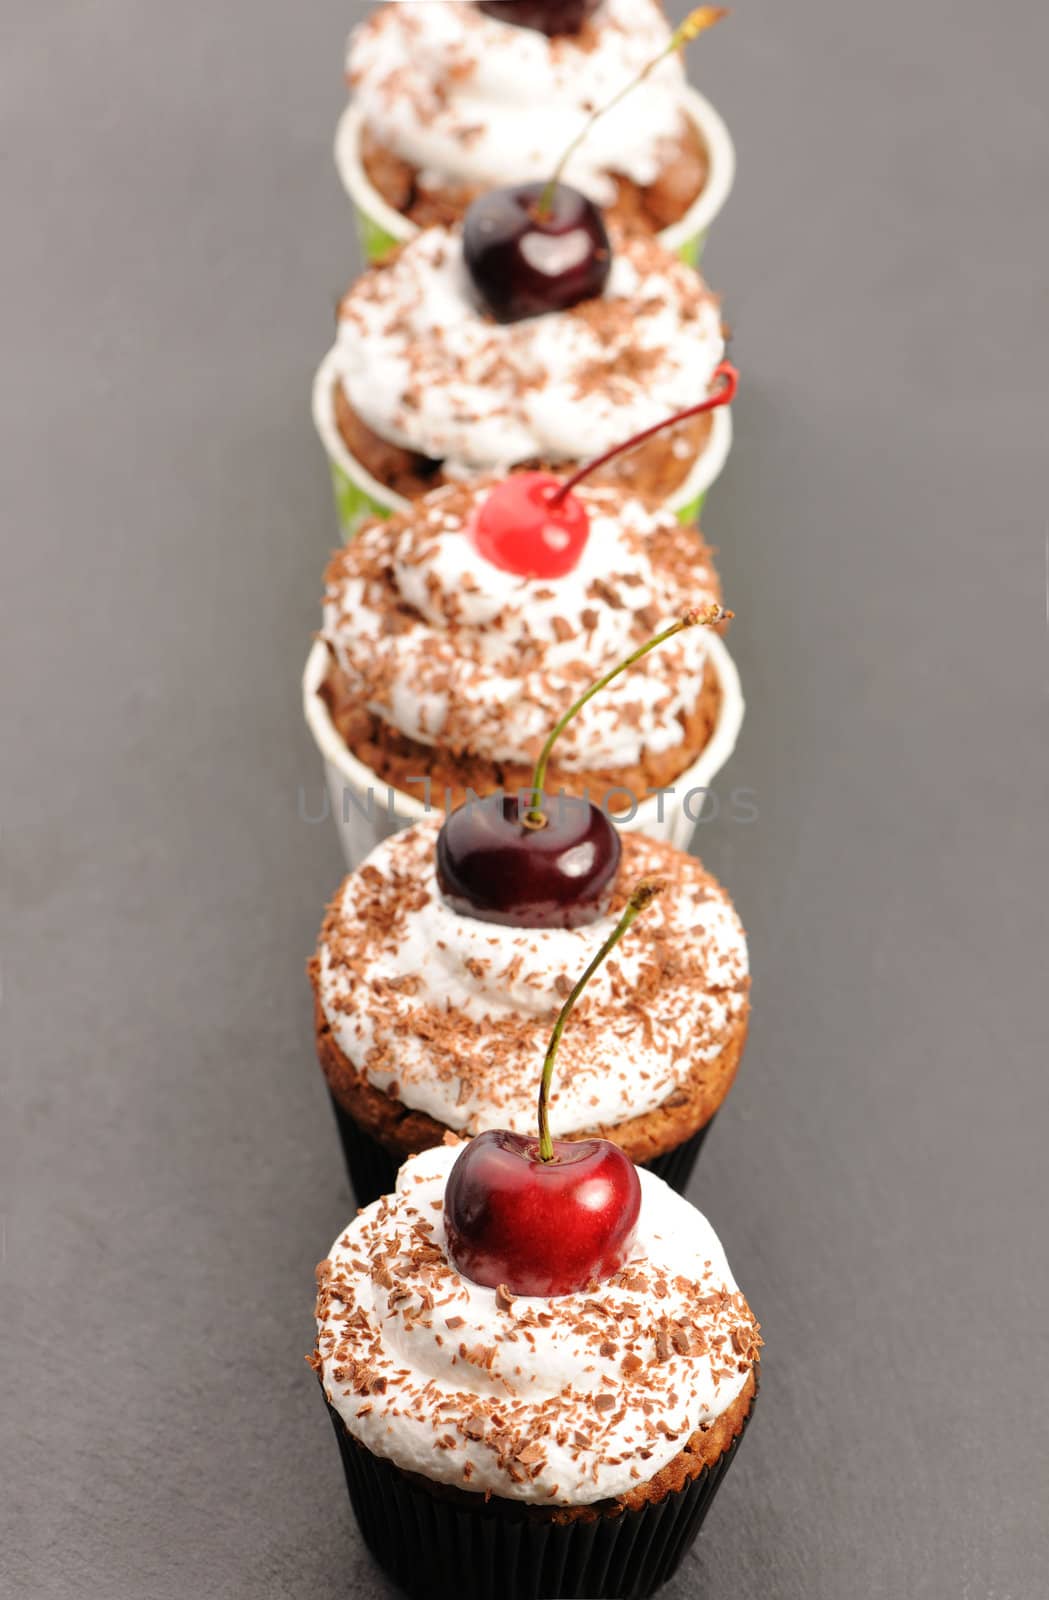 Cupcakes with whipped cream and cherry by haveseen